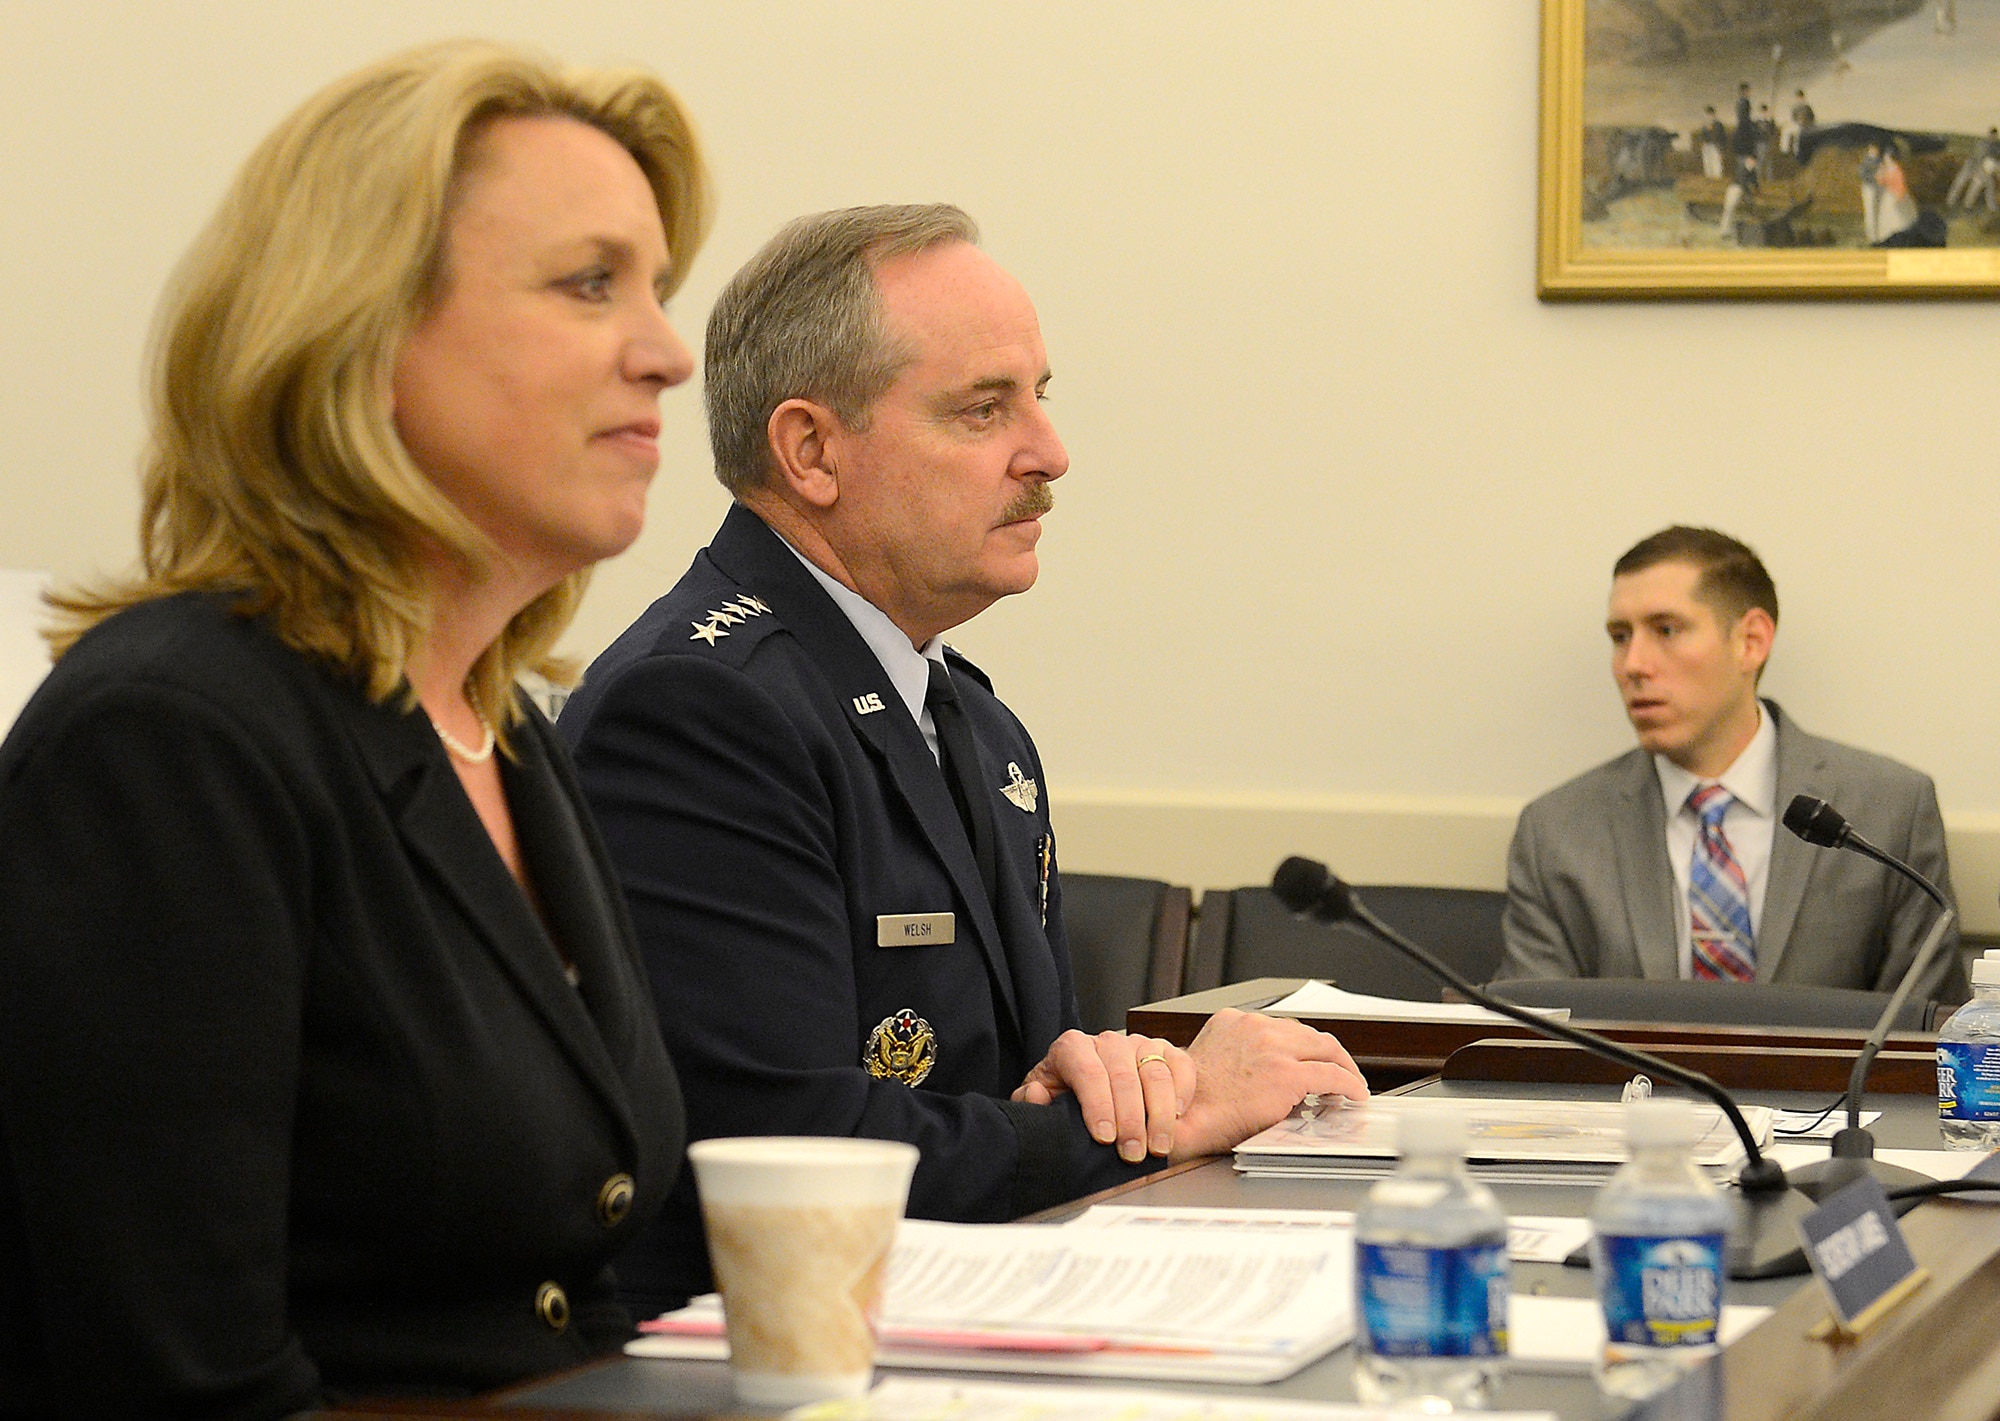 Secretary of the Air Force Deborah Lee James and Air Force Chief of Staff Gen. Mark A. Welsh III testify on the Air Force posture for fiscal year 2015 before the House Appropriations subcommittee on defense in Washington, D.C., March 26, 2014.  (U.S. Air Force photo/Scott M. Ash)
 